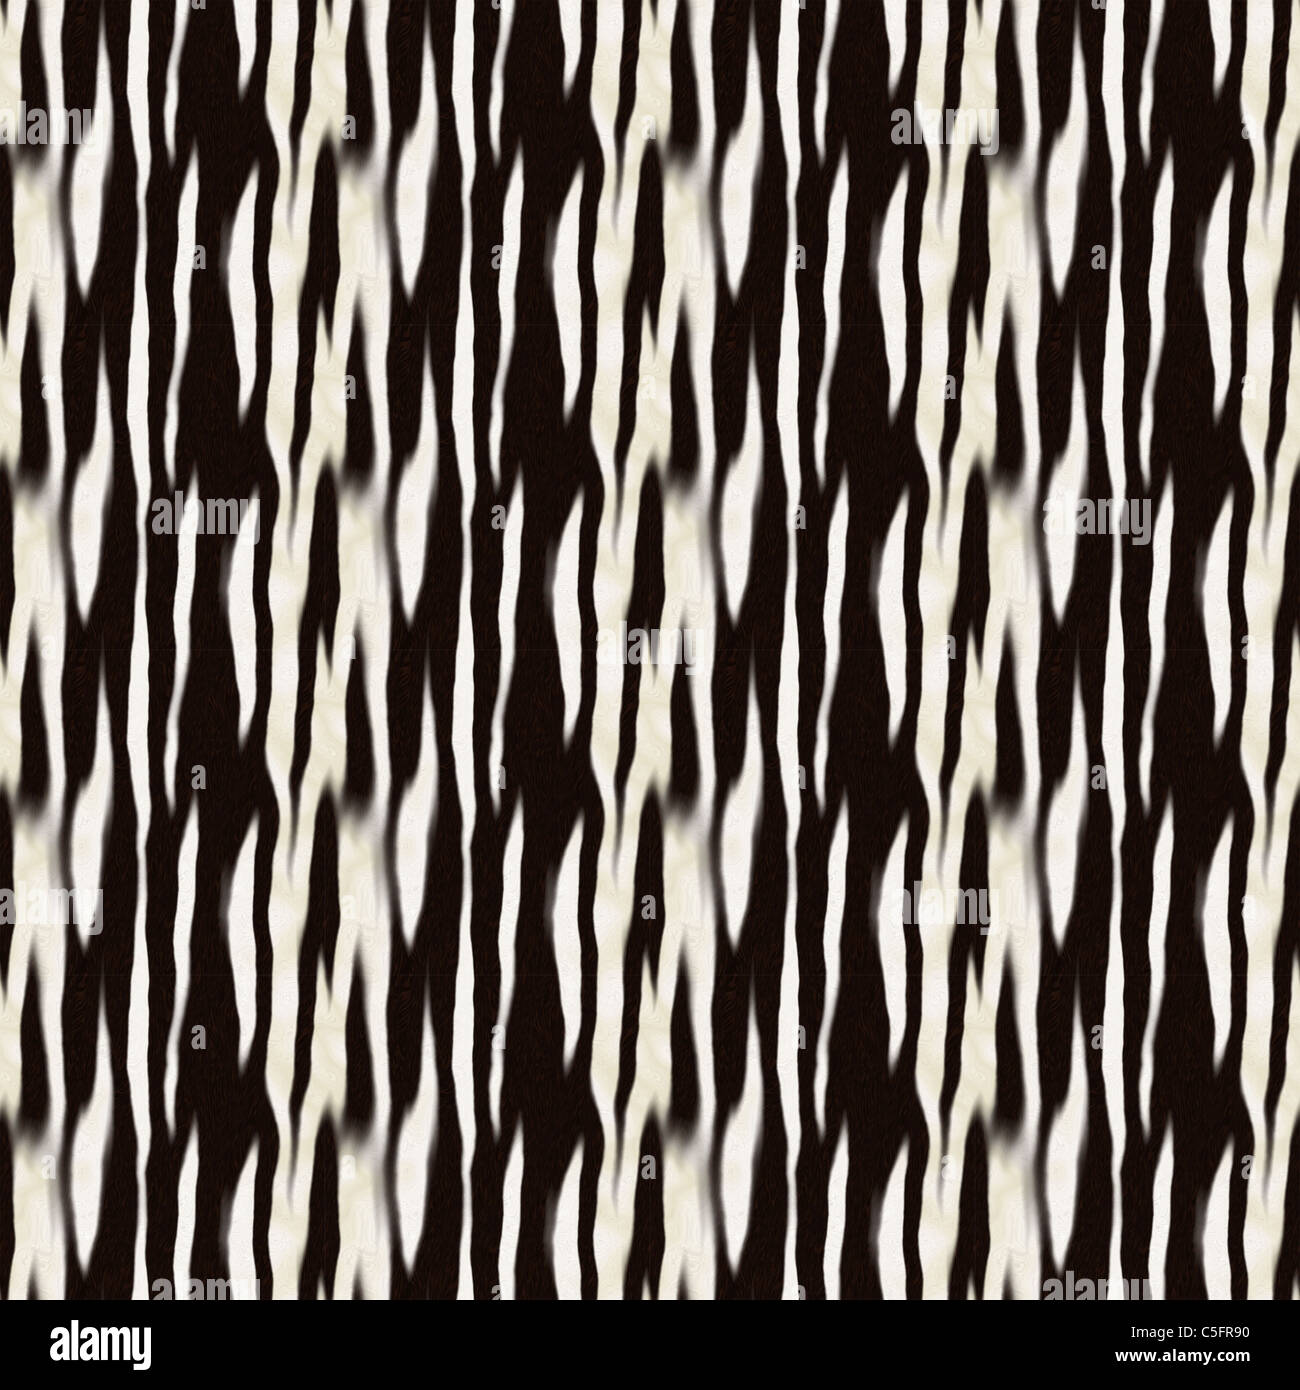 Zebra stripe pattern that tiles seamlessly as a pattern in any direction. Stock Photo